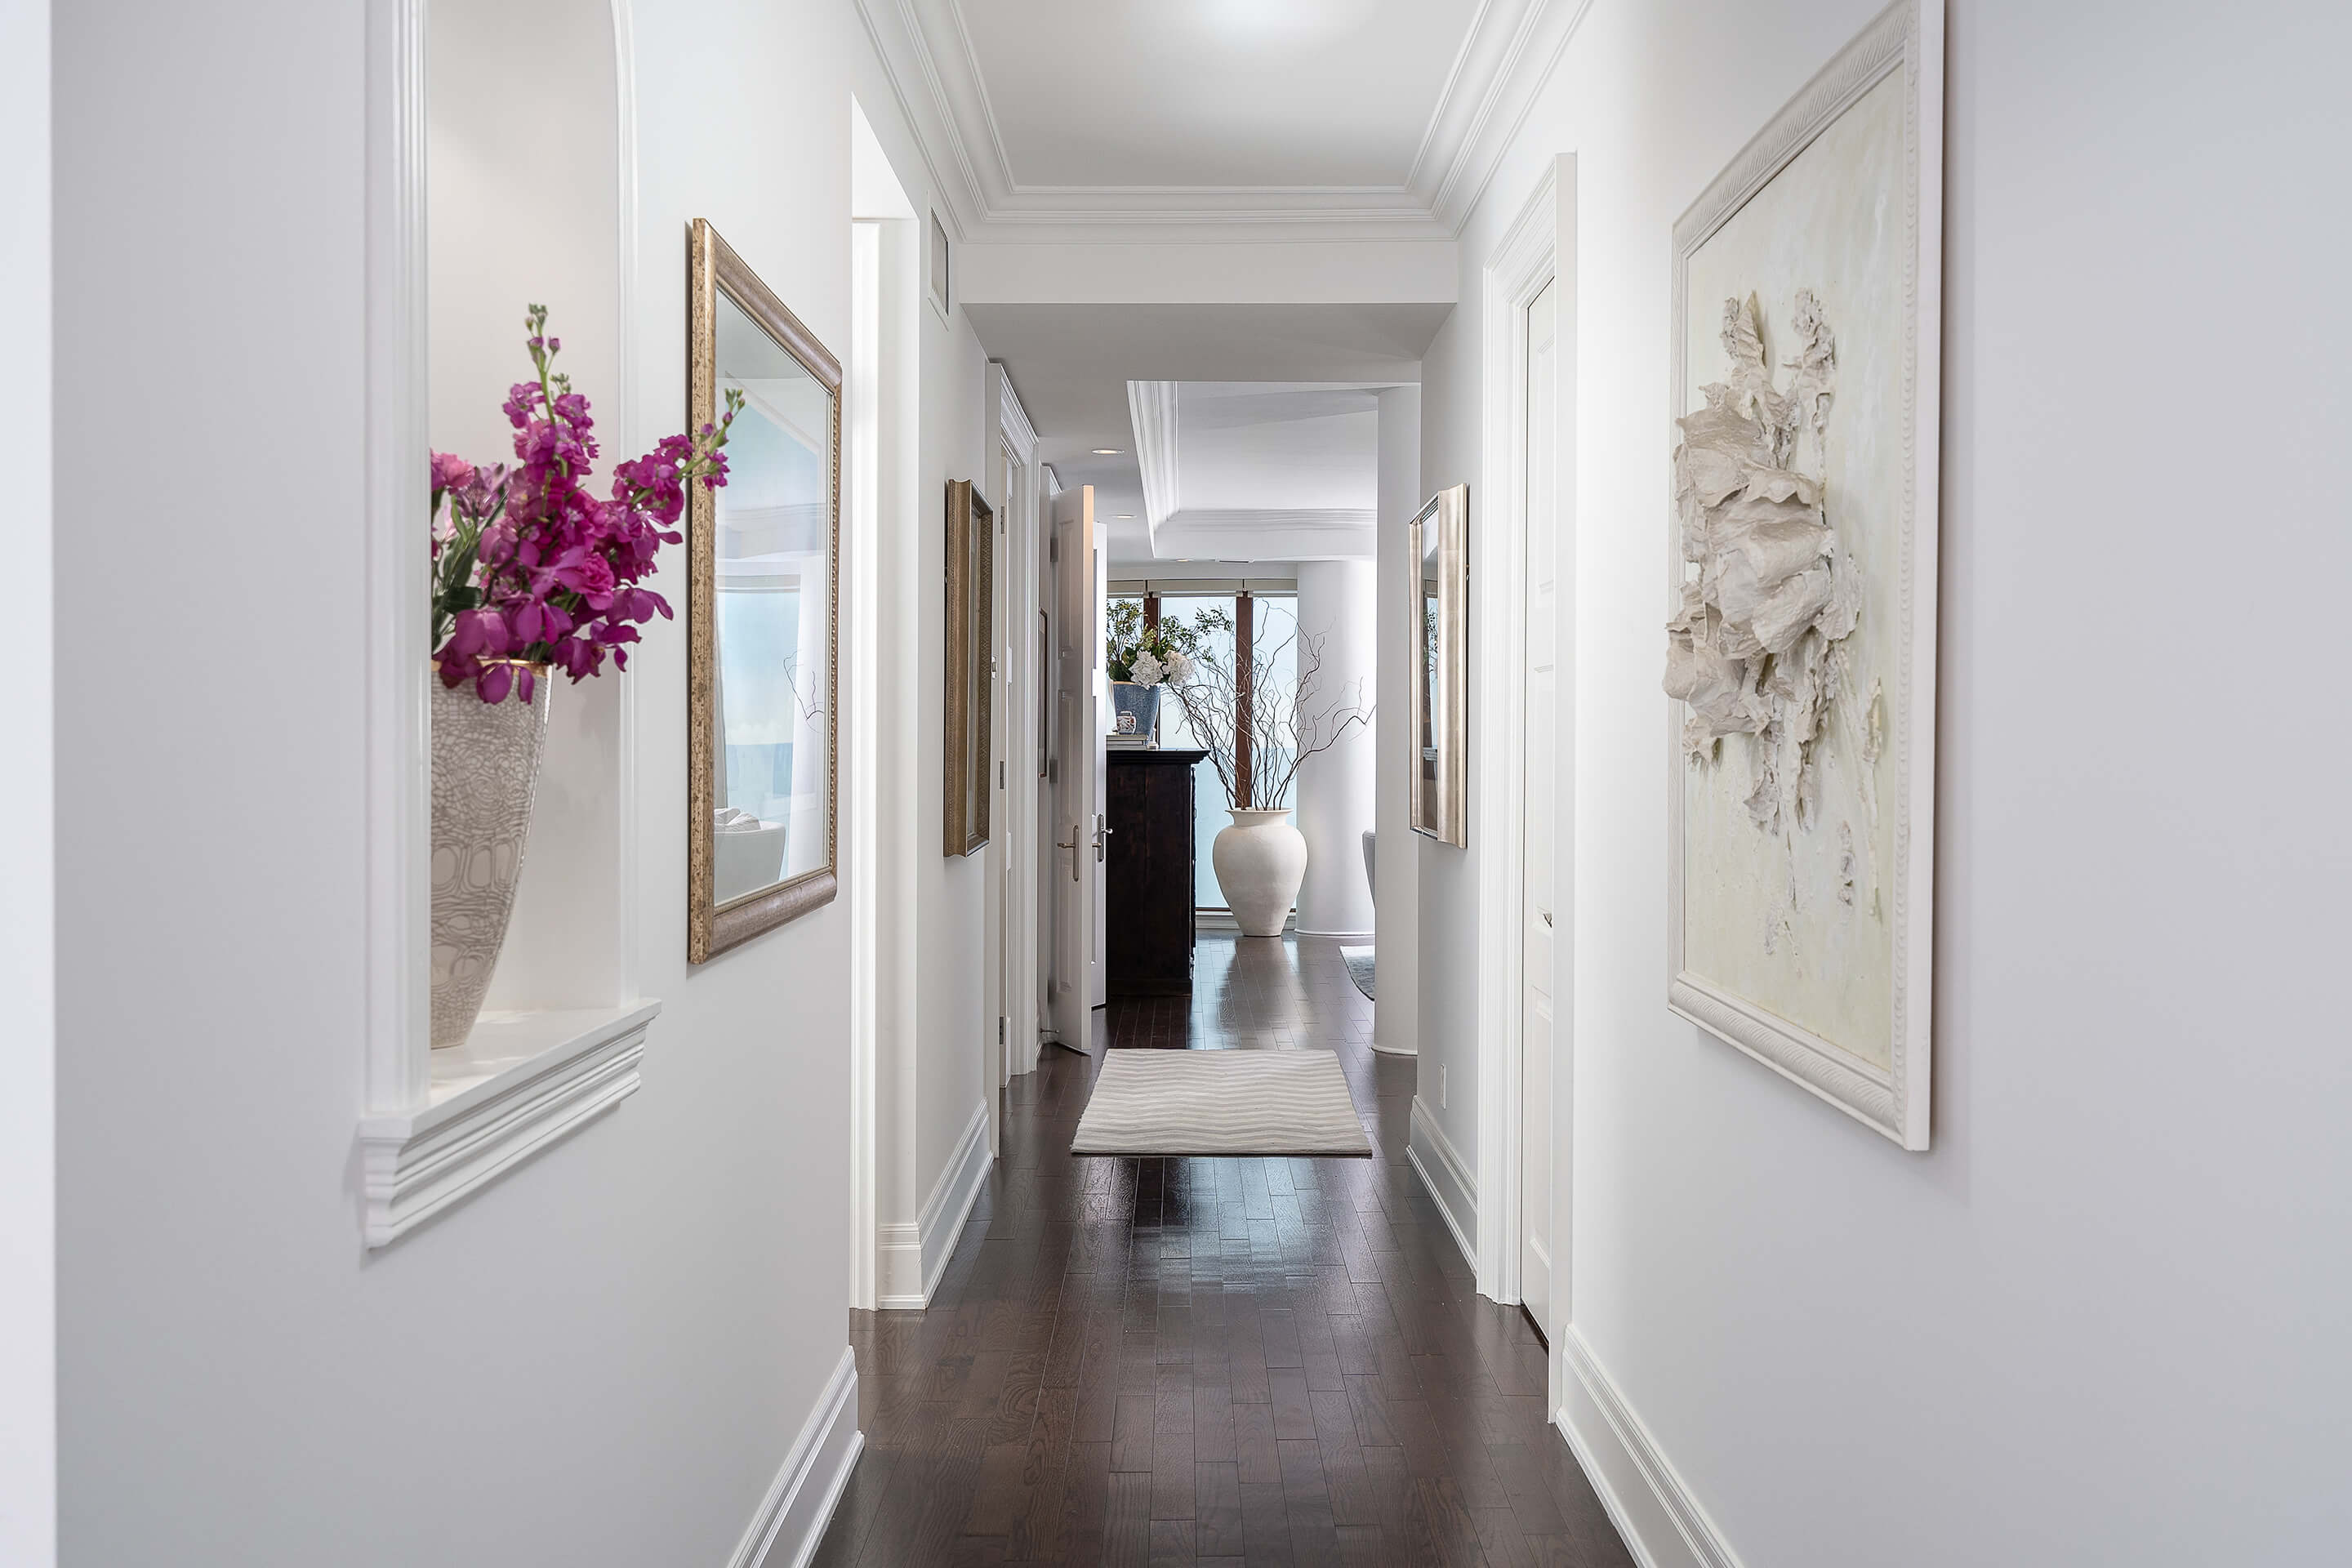 Hallway with white walls and frames on walls